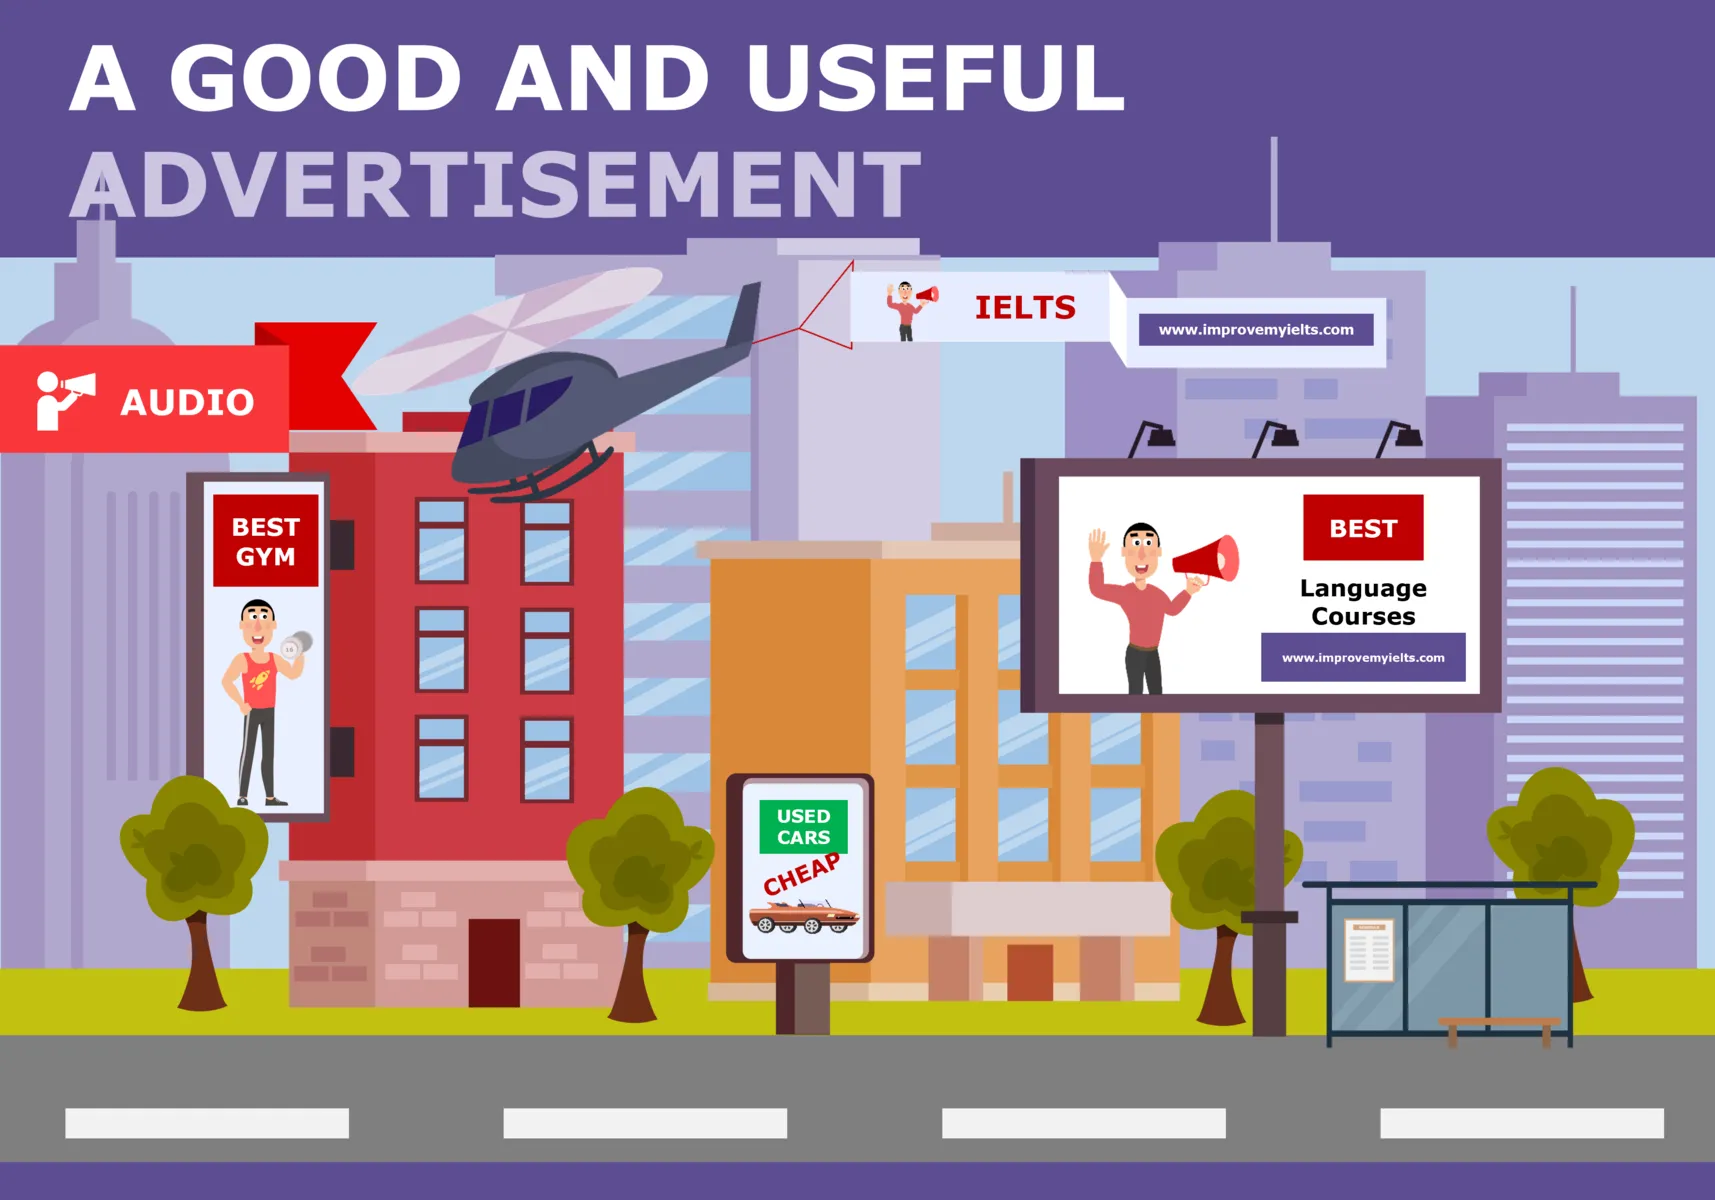 IELTS TOPIC: A Good And Useful Advertisement